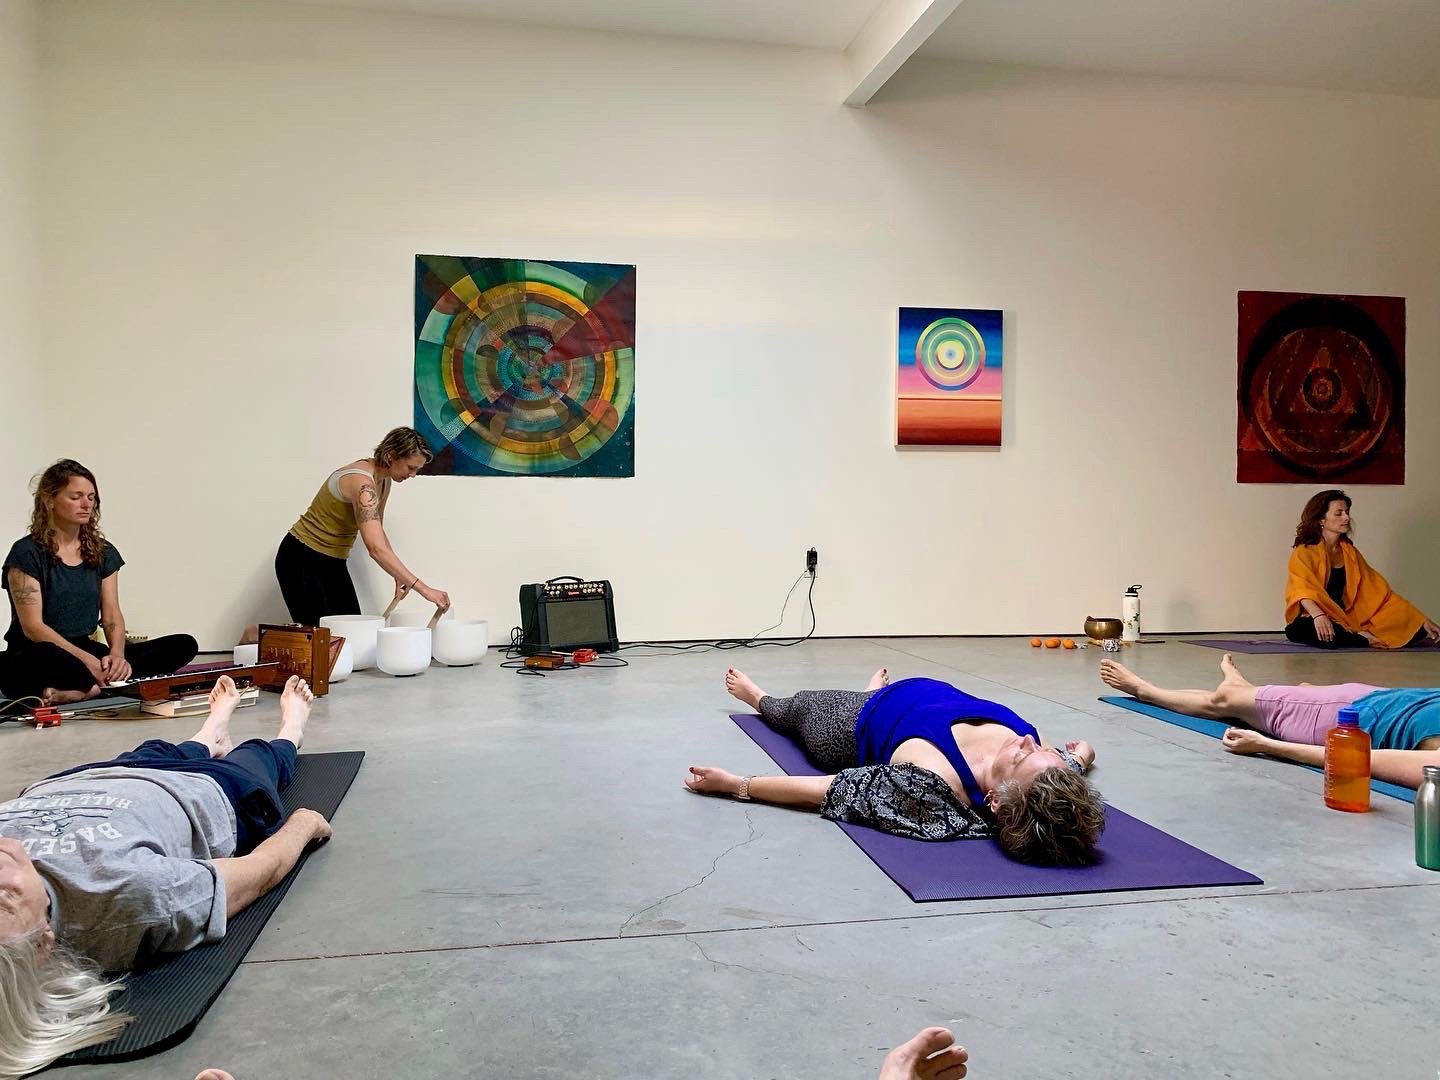 Sound Bath and Yoga class led by smithsmith and Skylar Smith, Quappi Projects 2022